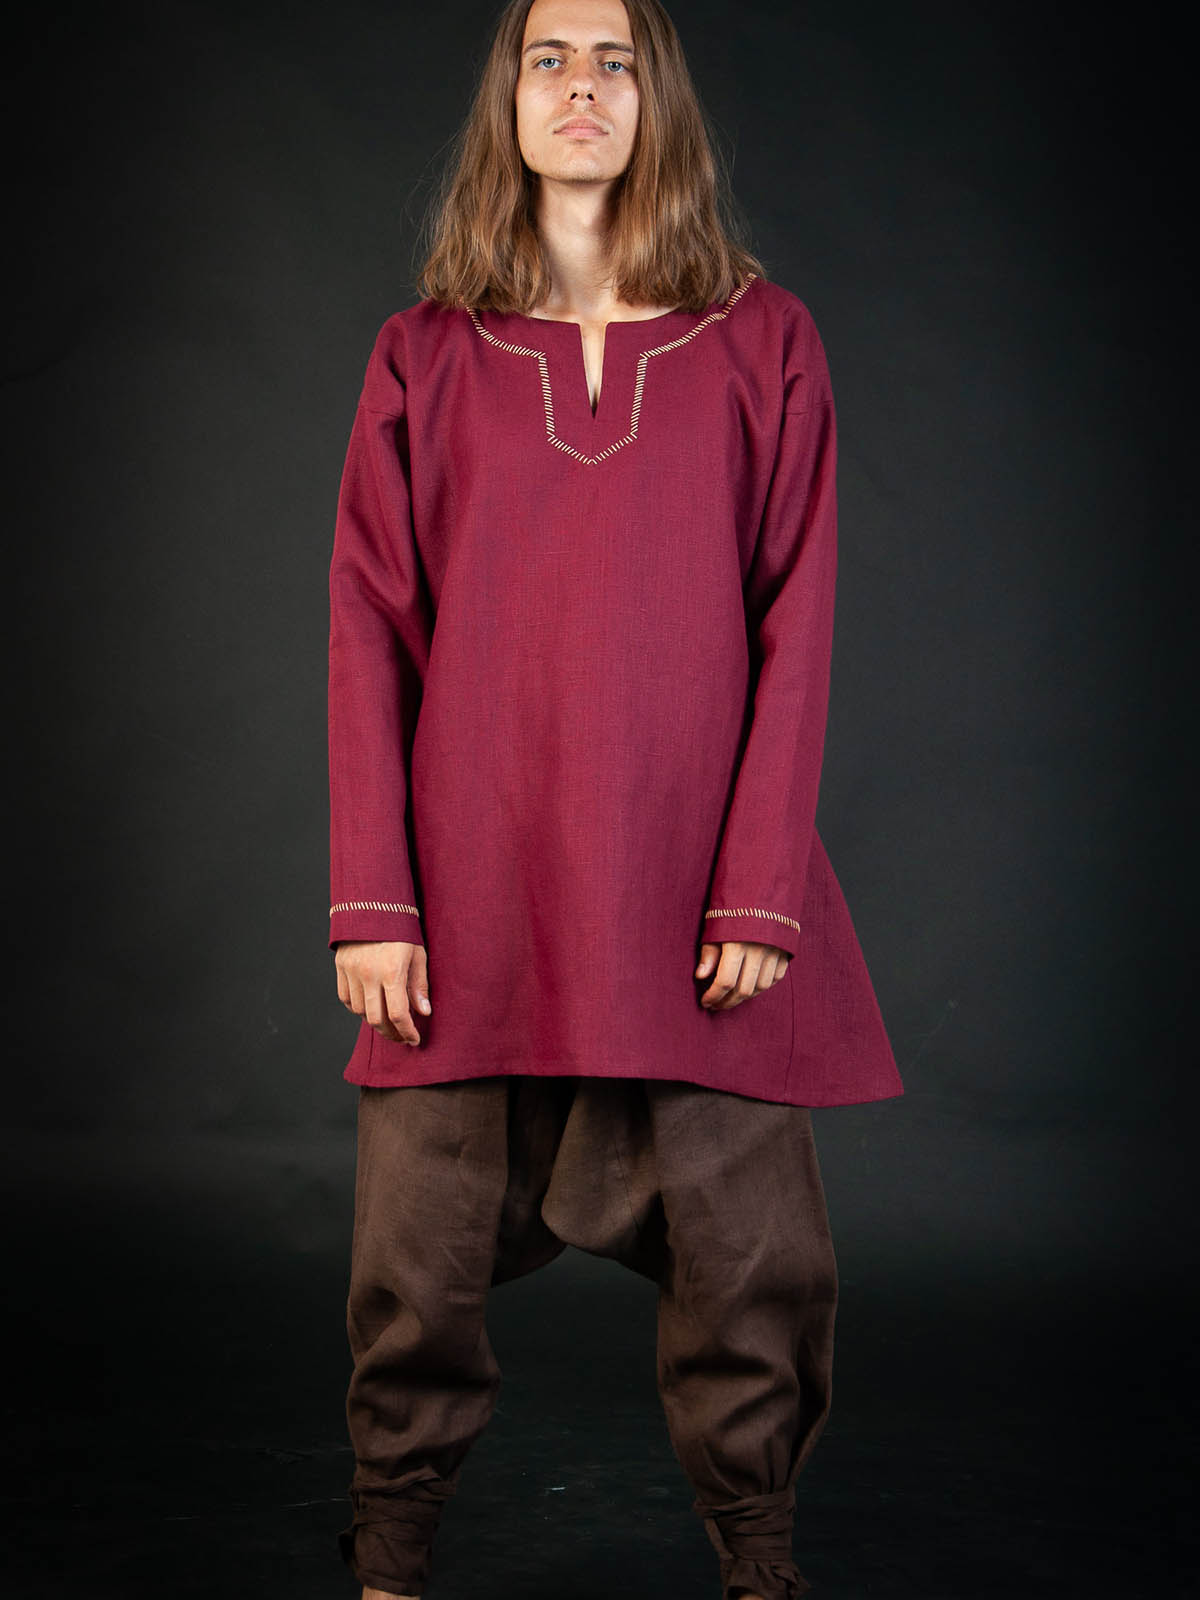 Bright autumn in medieval shirt by Steel Mastery